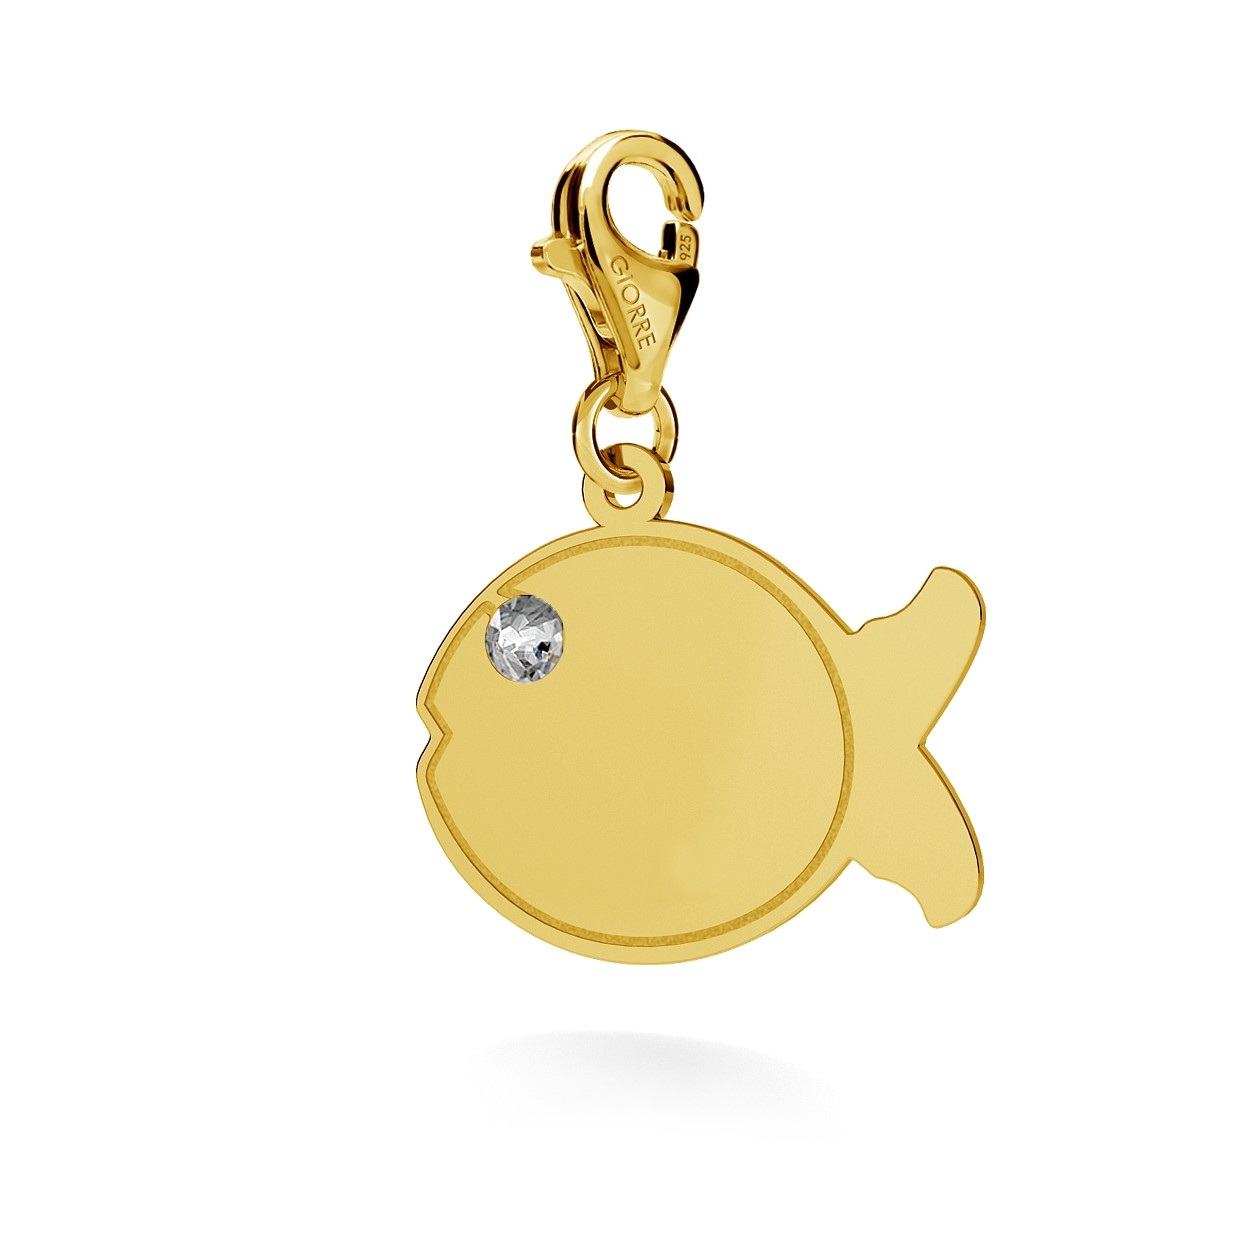 CHARM 115, FISH WITH ENGRAVE, STERLING SILVER (925) RHODIUM OR GOLD PLATE